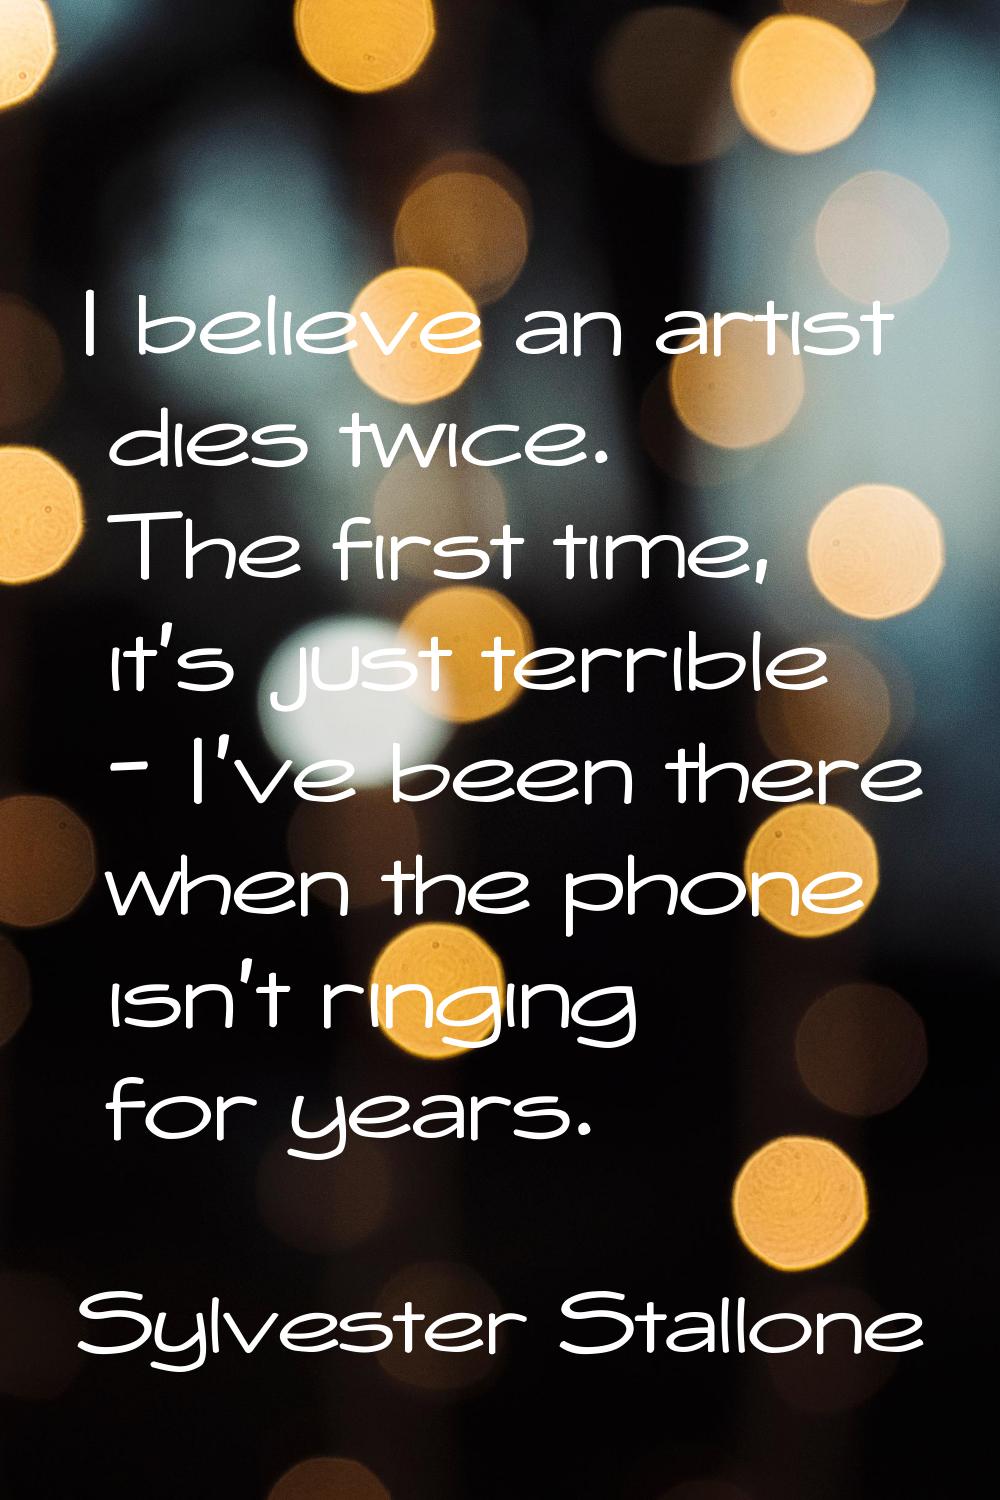 I believe an artist dies twice. The first time, it's just terrible - I've been there when the phone